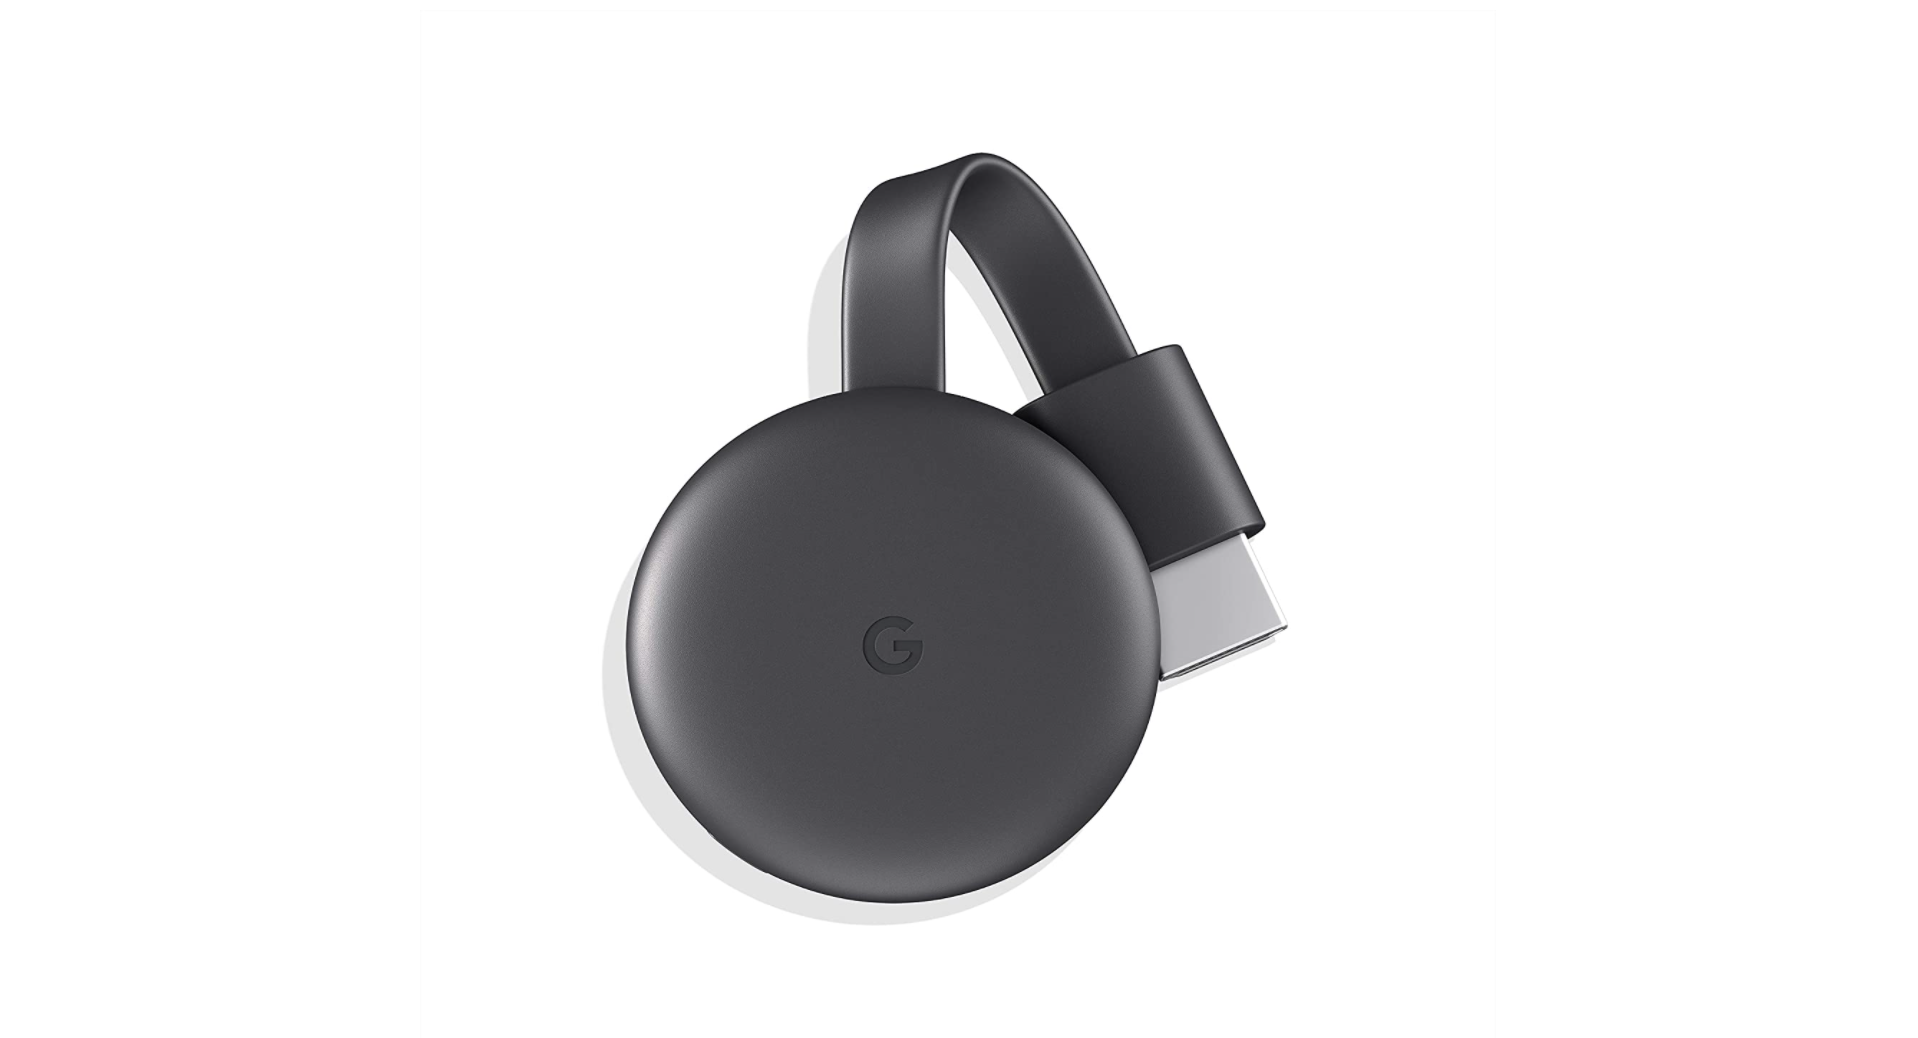 What Is a Chromecast and How Does It Work?